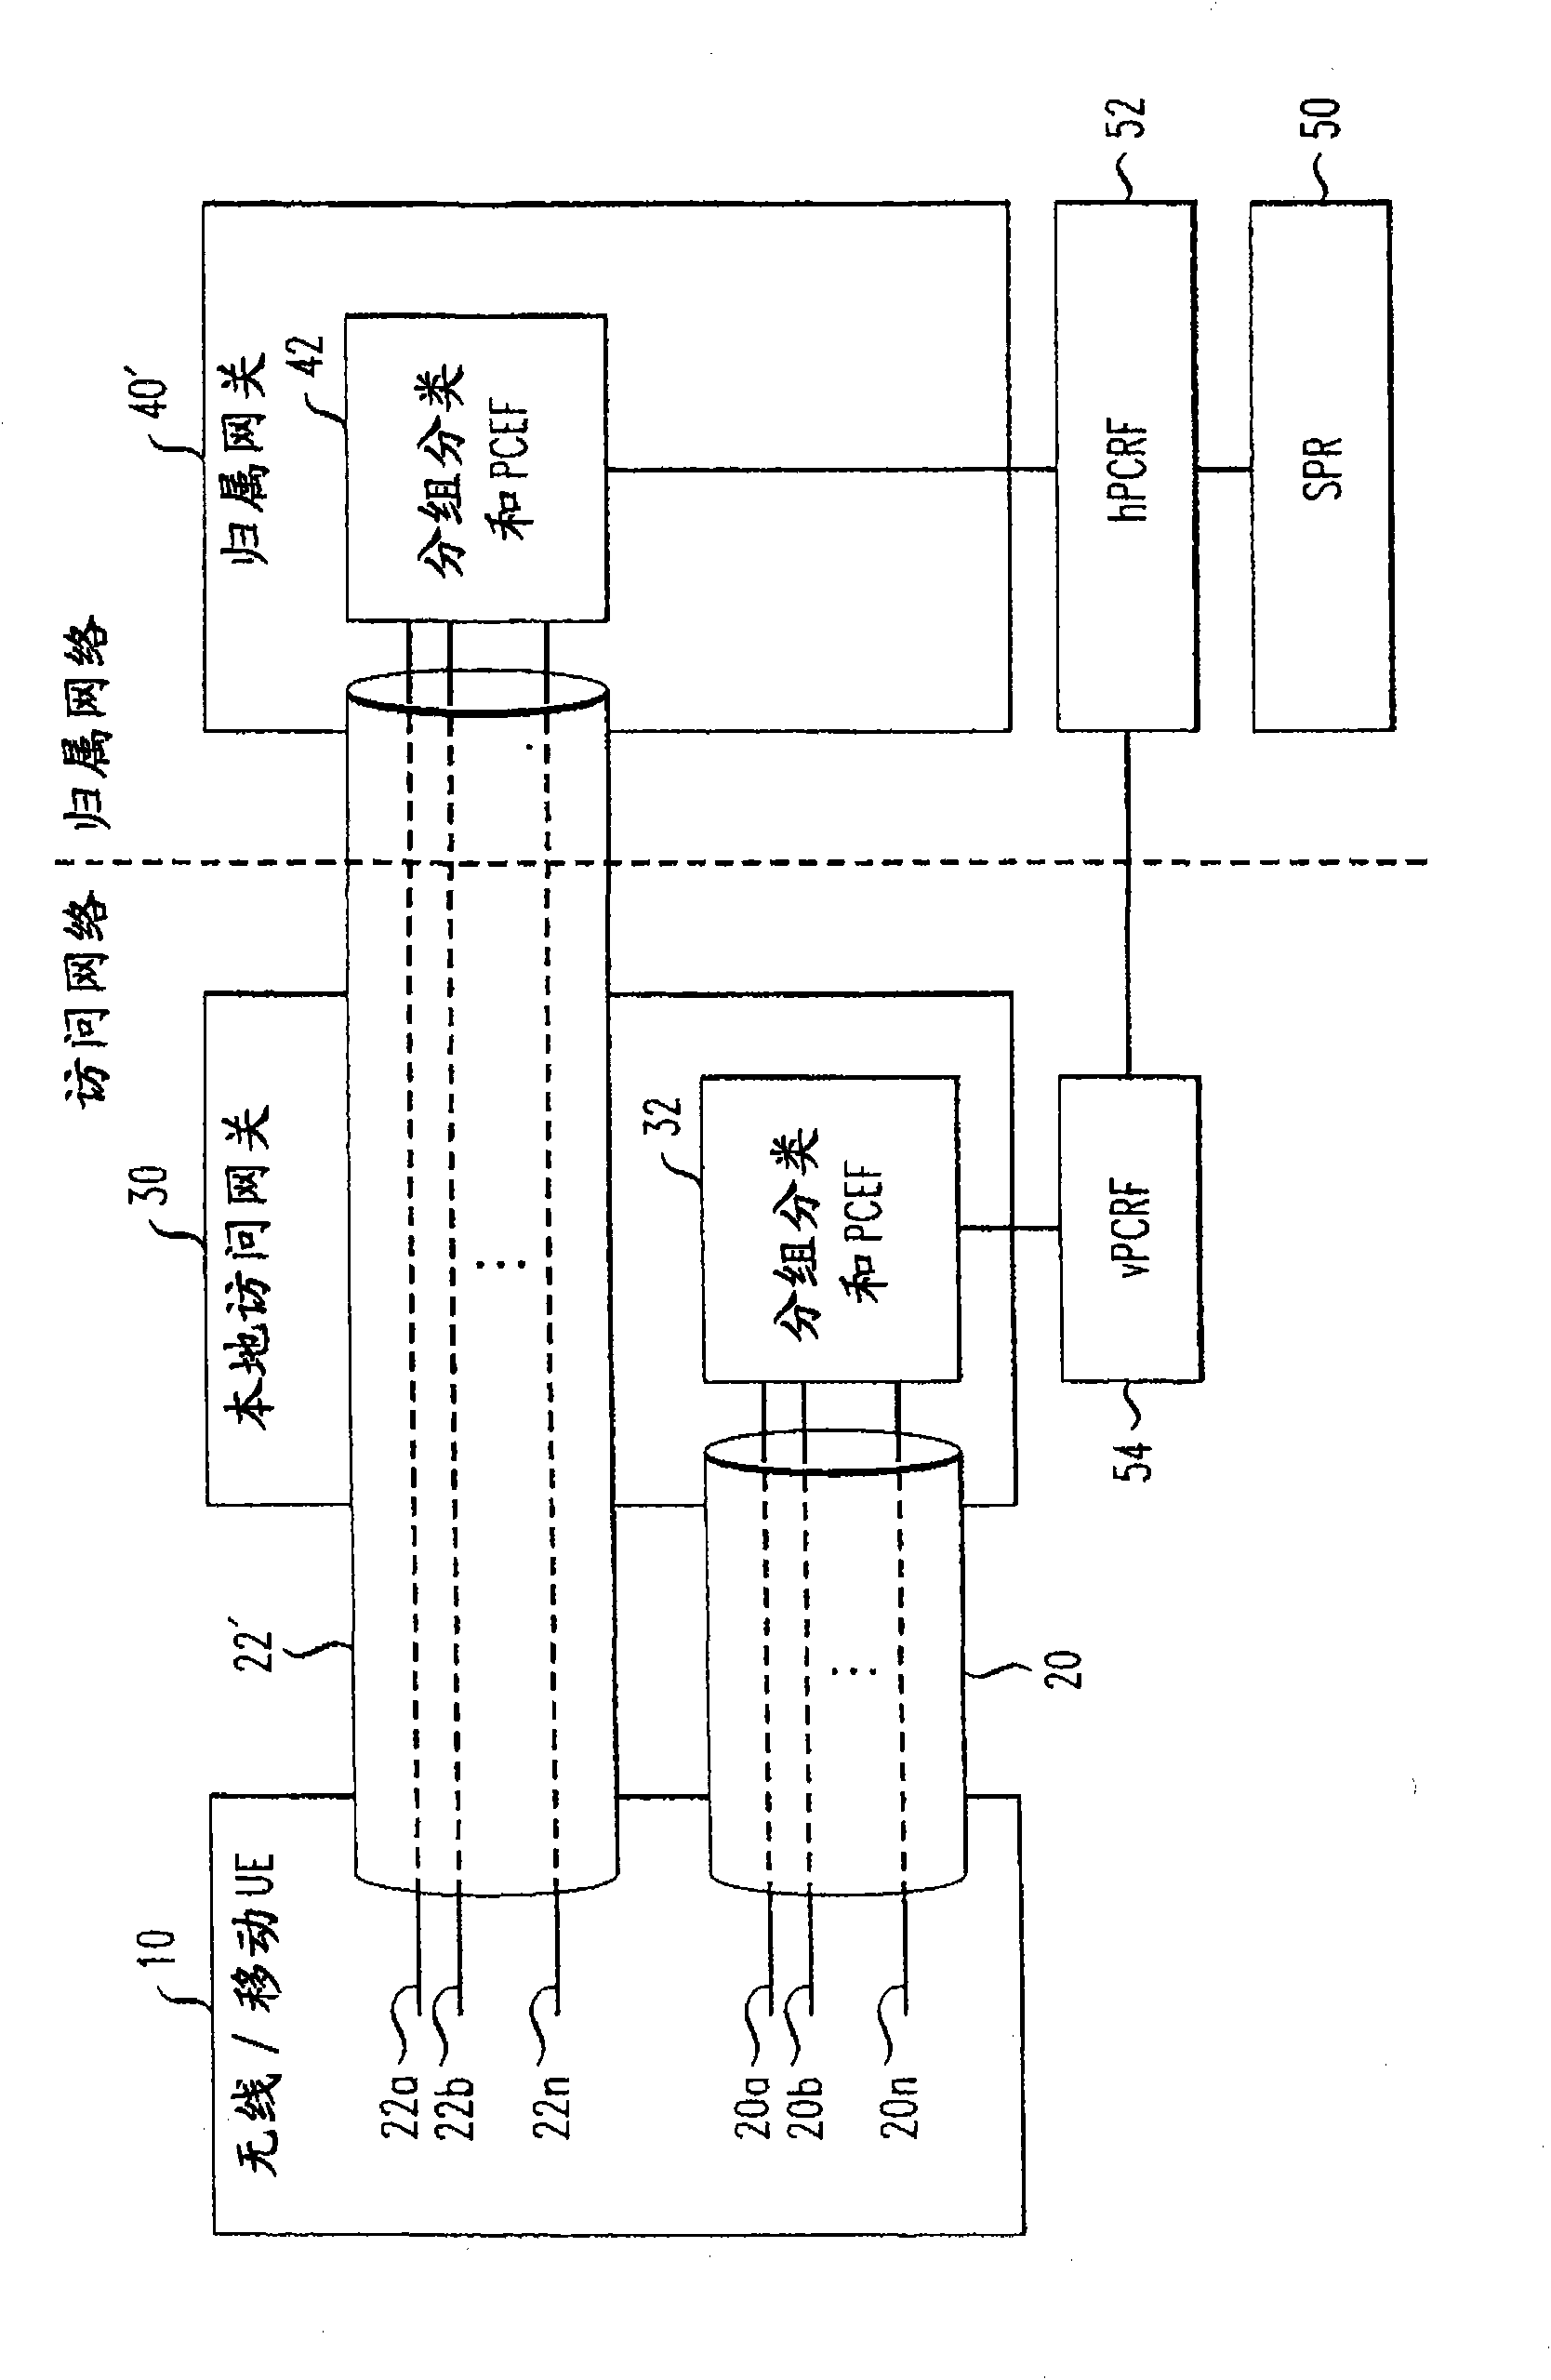 Packet filtering/classification and/or policy control support from both visited and home networks